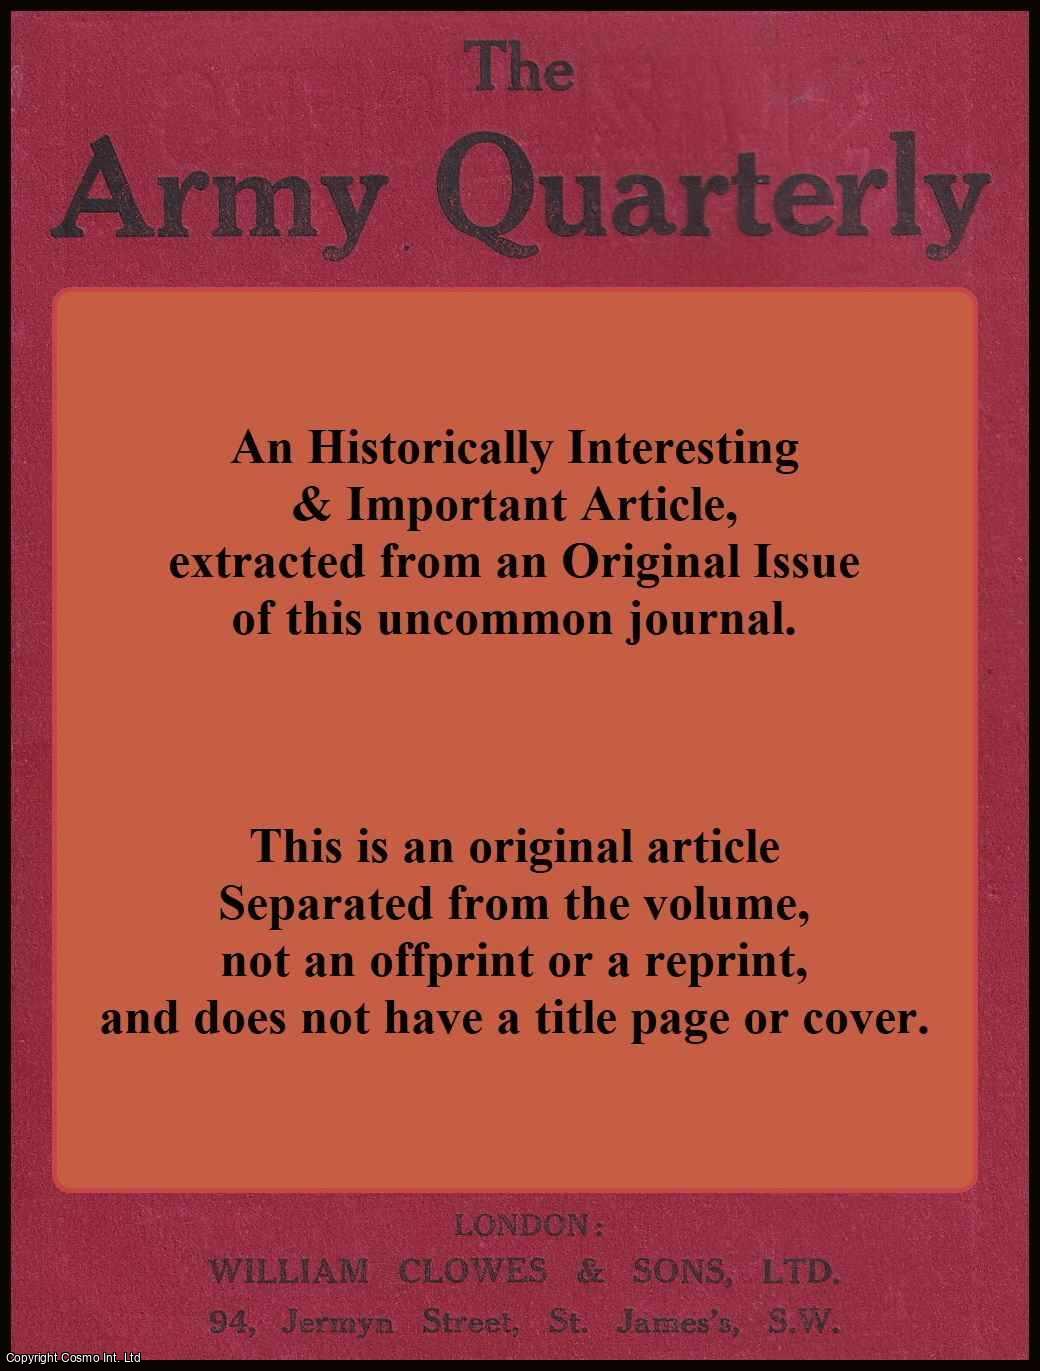 Lieut-Colonel E.G. Hume - The Role of Modern Mobile Protective Forces. An original article from the Army Quarterly, 1931.